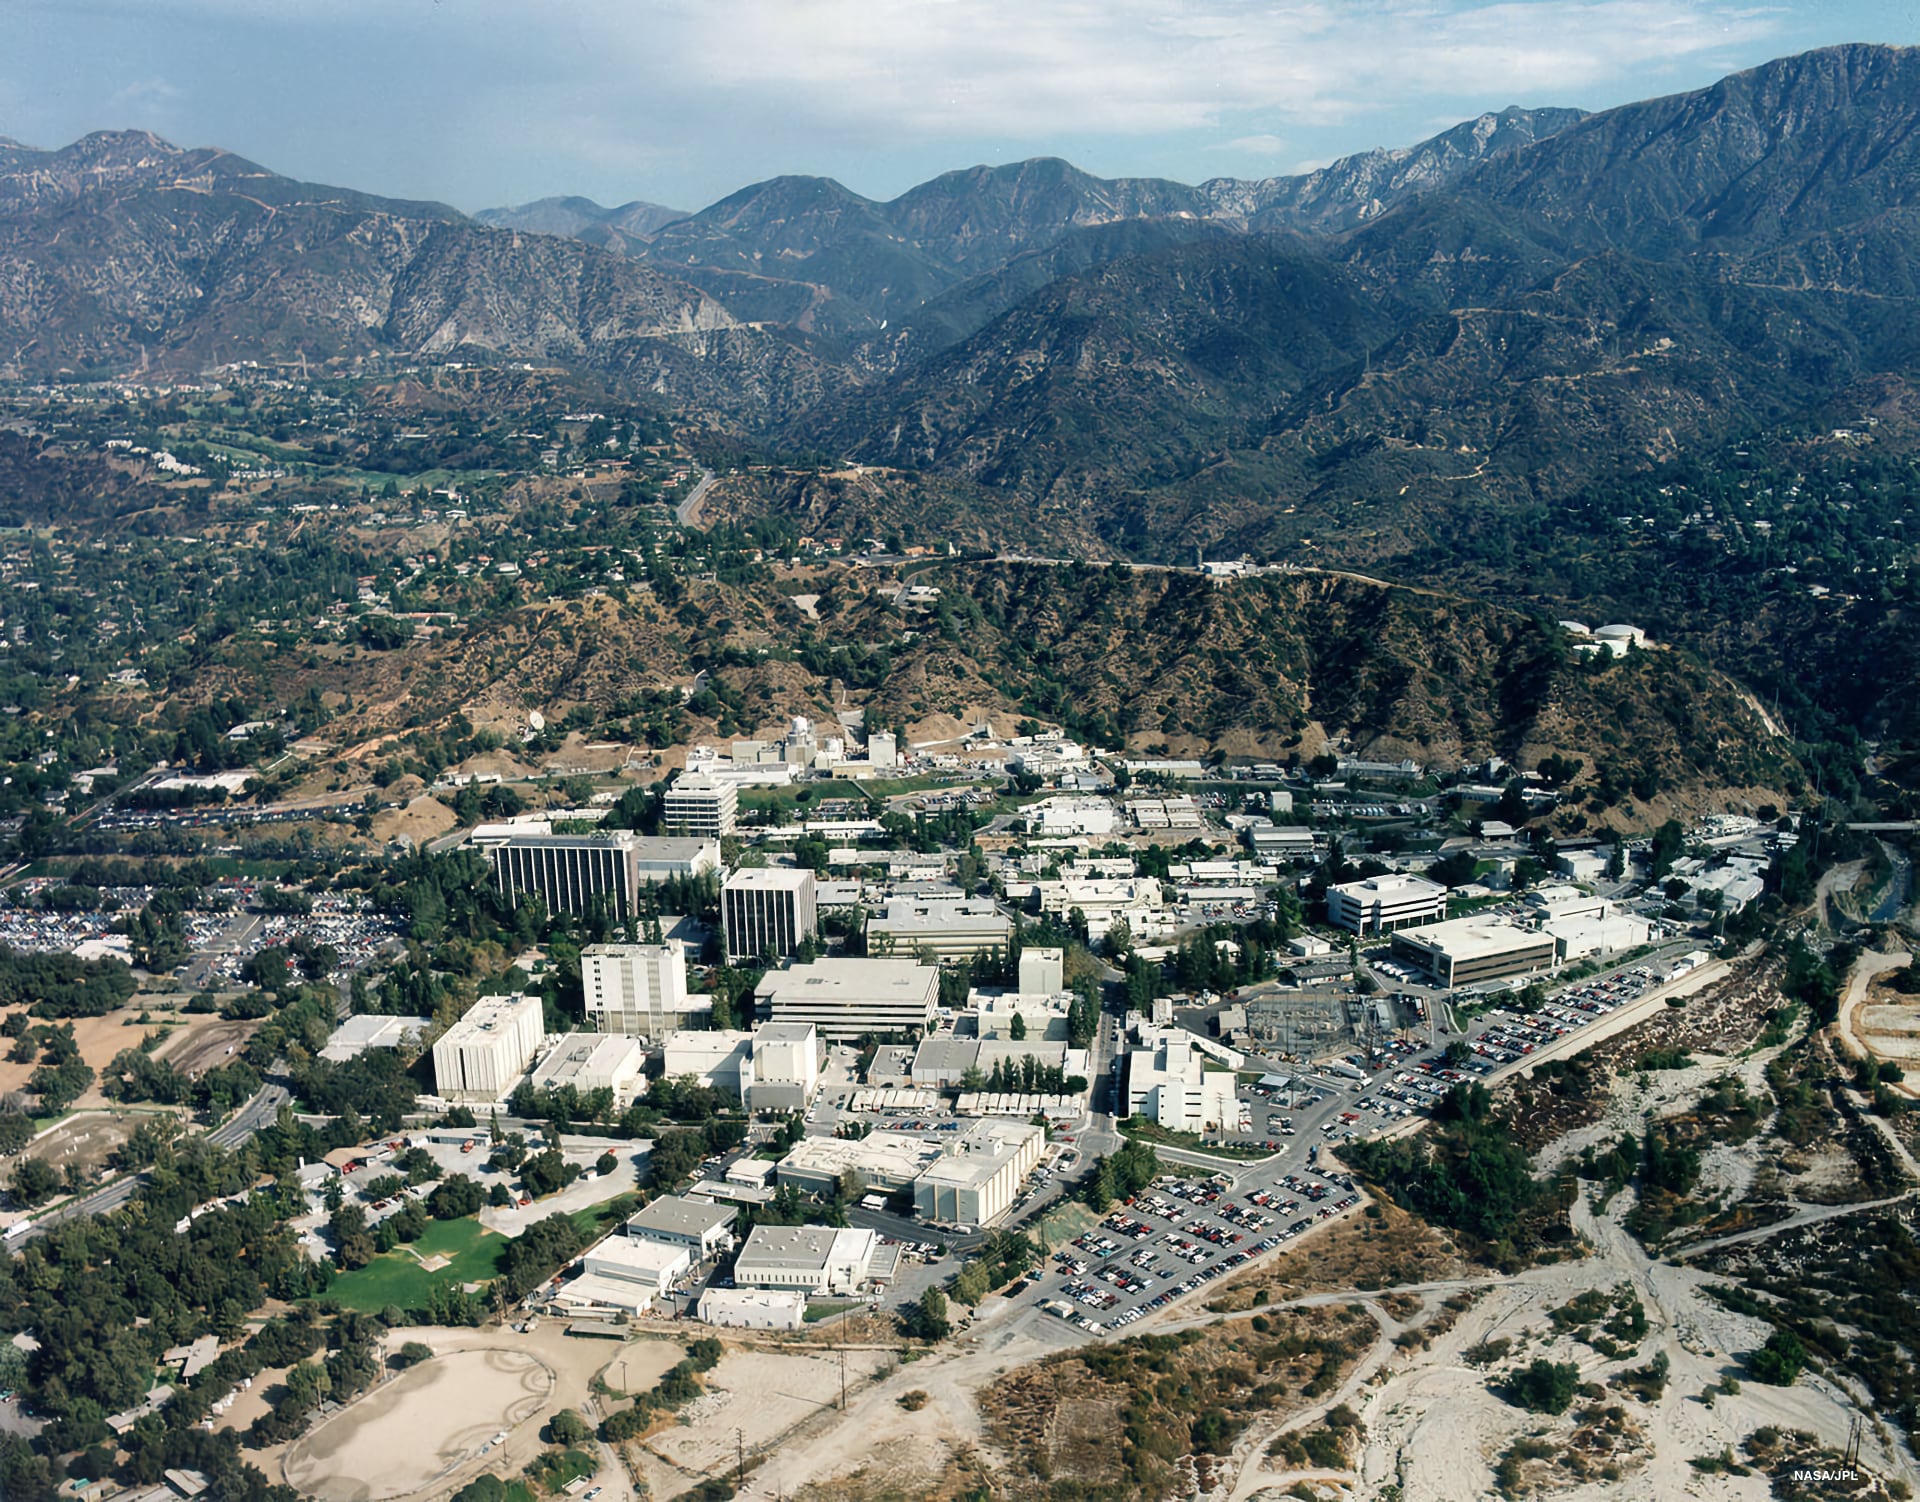 Aerial view of NASA’s Jet Propulsion Laboratory. JPL is bounded by the San Gabriel Mountains to the north, the Arroyo Seco to the south, La Cañada Flintridge to the west, and Pasadena to the east. Image credit: NASA/JPL